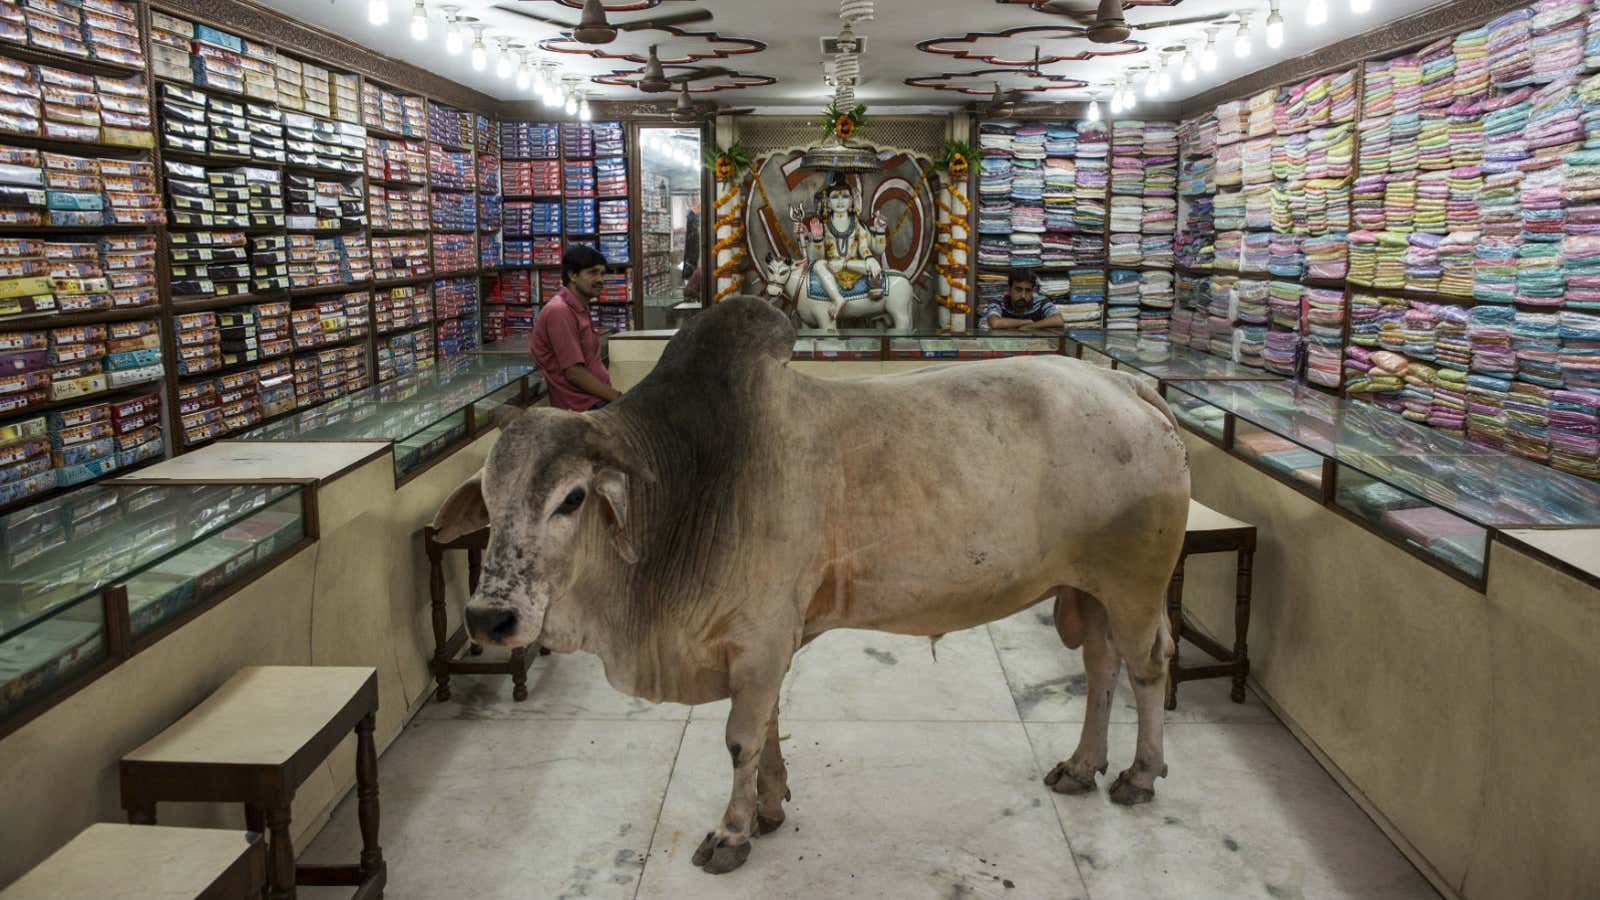 No bull in an Indian shop.